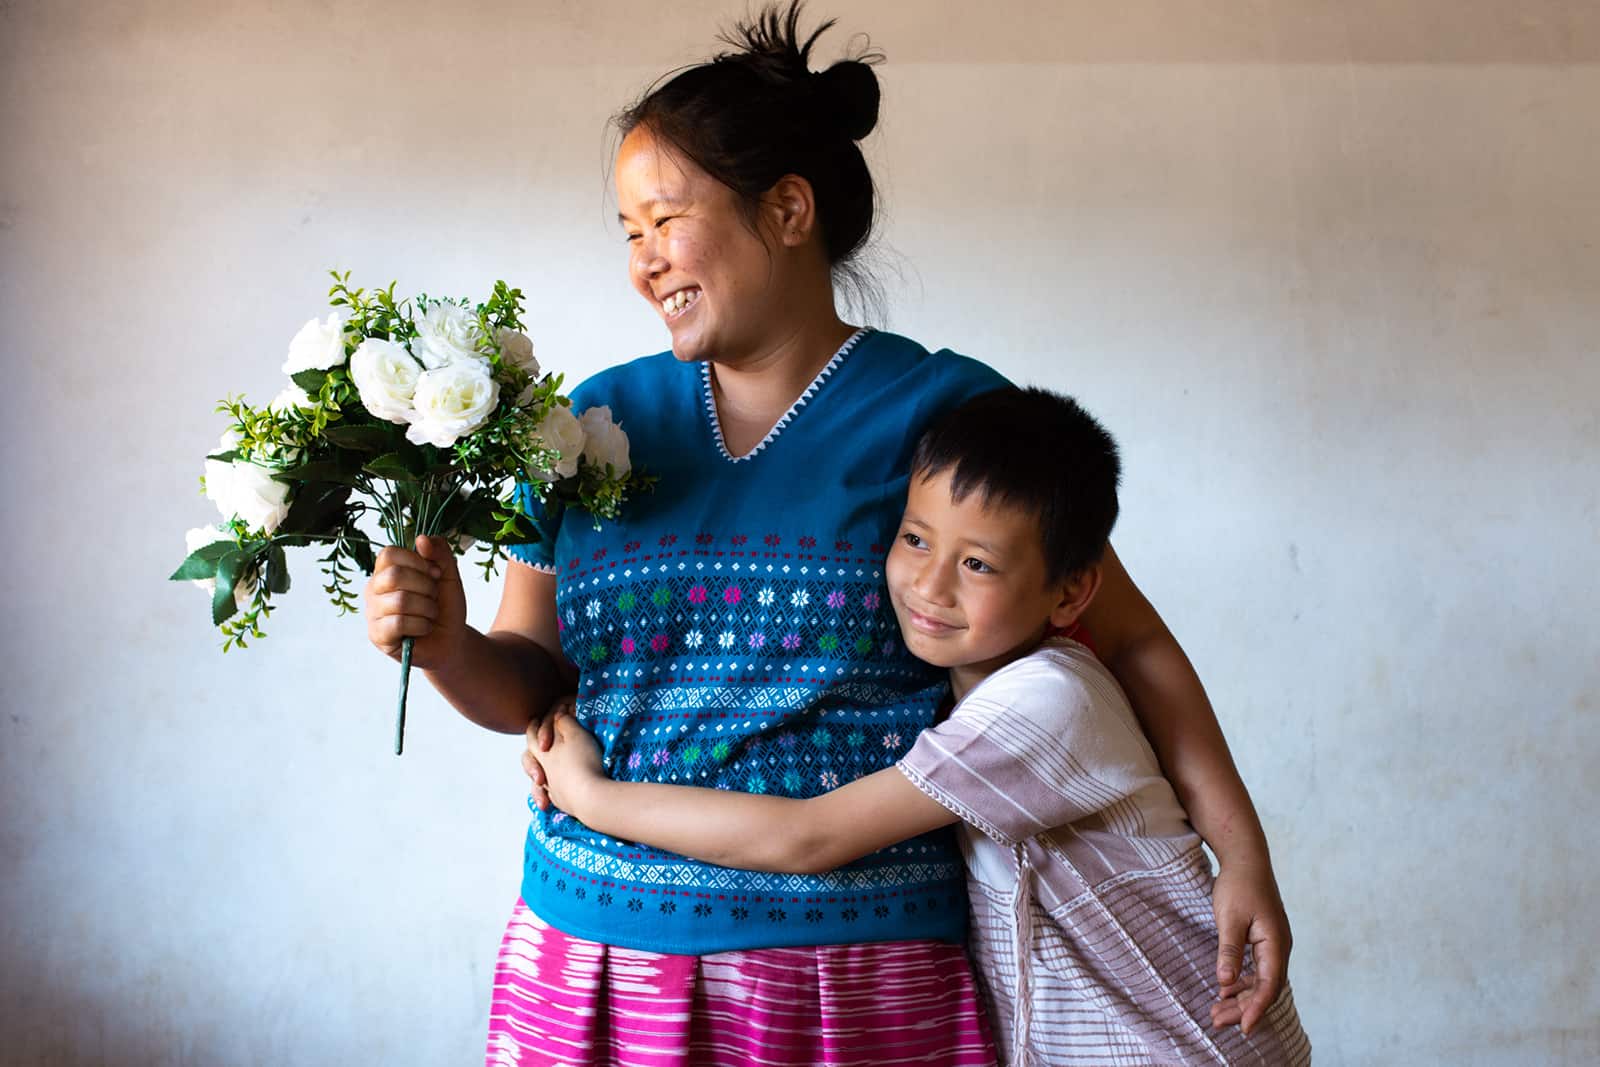 Mother holding flowers with child hugging her